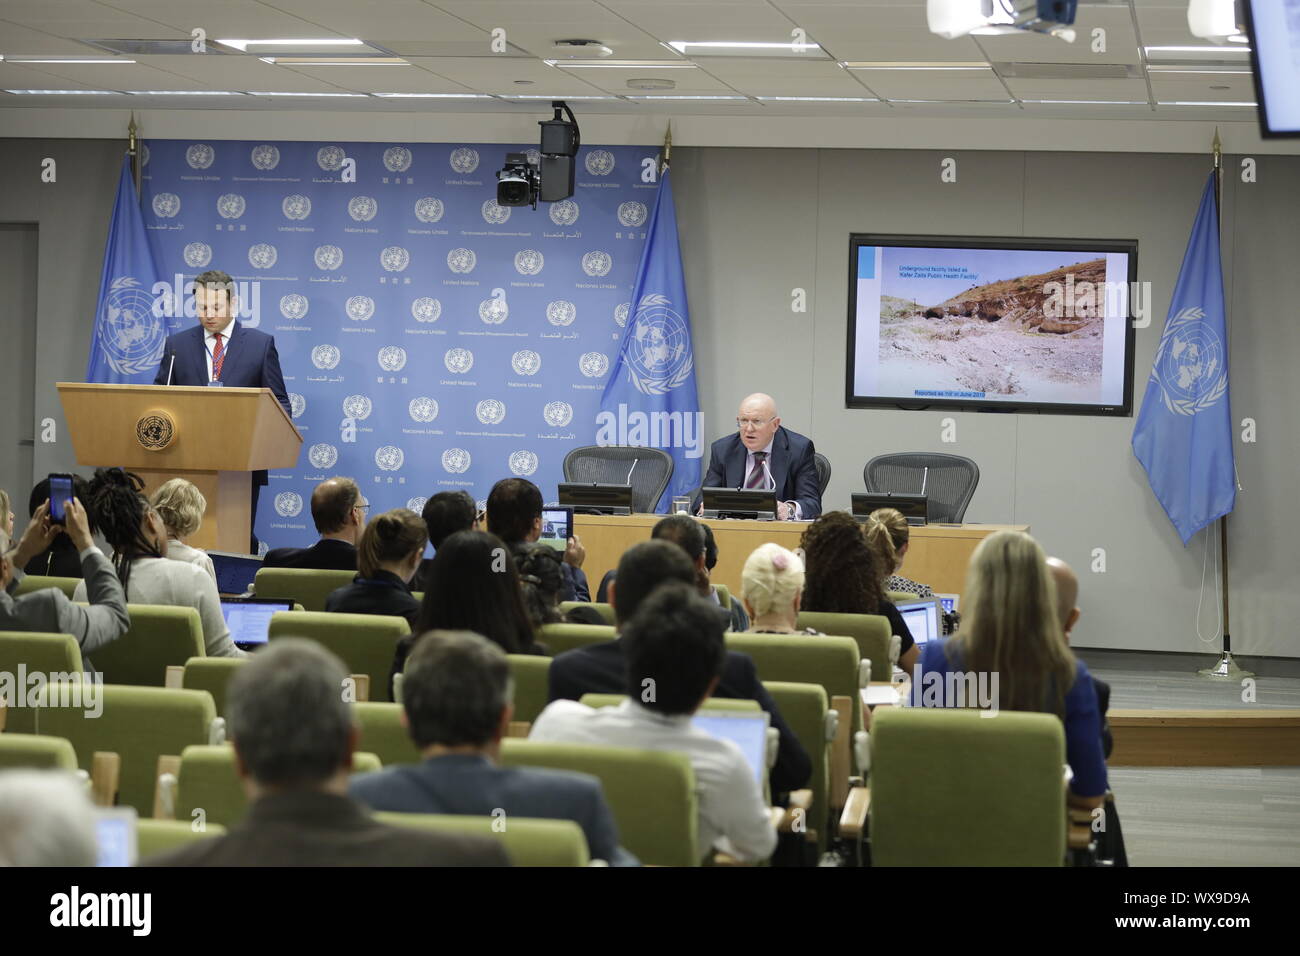 United Nations, UN headquarters in New York. 16th Sep, 2019. Vassily Nebenzia (R, Rear), Russian permanent representative to the United Nations and president of the UN Security Council for the month of September, speaks to journalists during a press conference on the situation in Syria, at the UN headquarters in New York, on Sept. 16, 2019. Russia's UN envoy said Monday that the latest ceasefire for Syria's Idlib has been breached by Jihadist rebels. Credit: Li Muzi/Xinhua/Alamy Live News Stock Photo